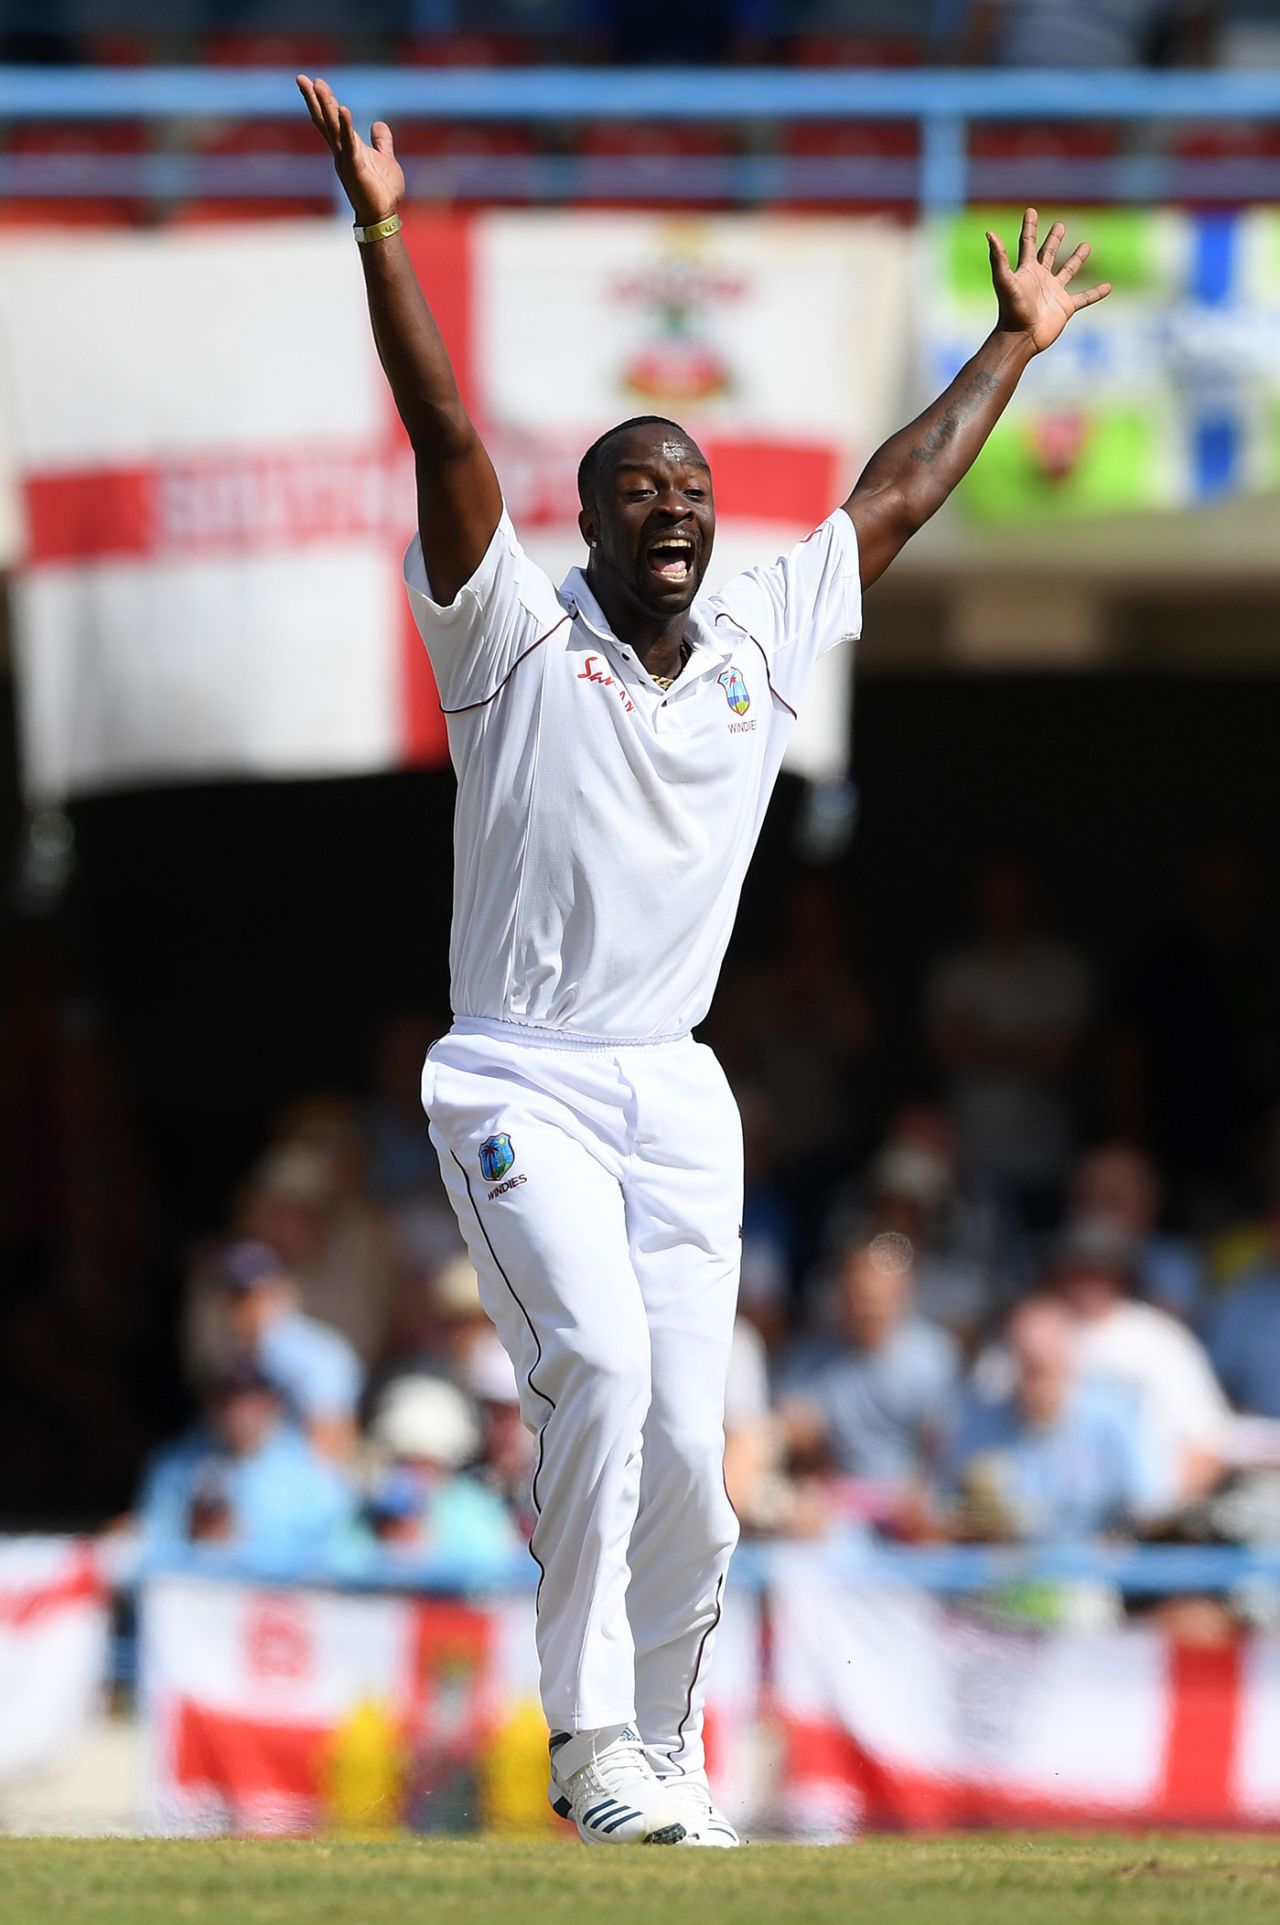 Kemar Roach claimed four first-innings wickets, West Indies v England, 2nd Test, Antigua, January 31, 2019